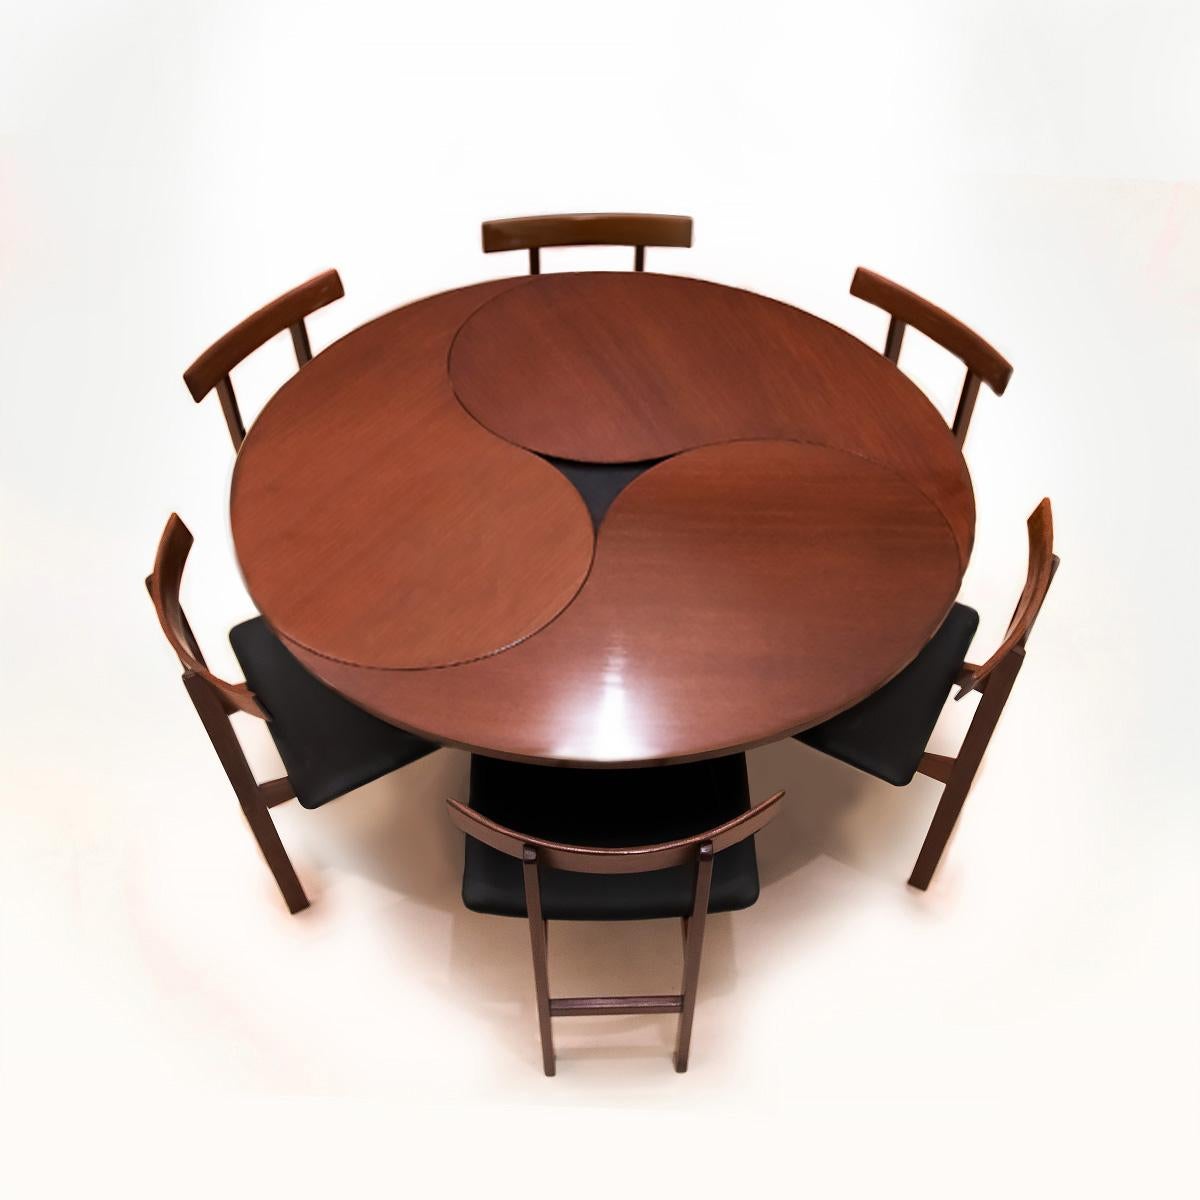 An extraordinary Danish mid century vintage teak and wenge Model 550 space saving dining table designed by Ole Gjerløv-Knudsen and Torben Lind matched to a set of 6 Inger Klingenberg Model 193 chairs. 

This vintage Danish dining set is a perfect